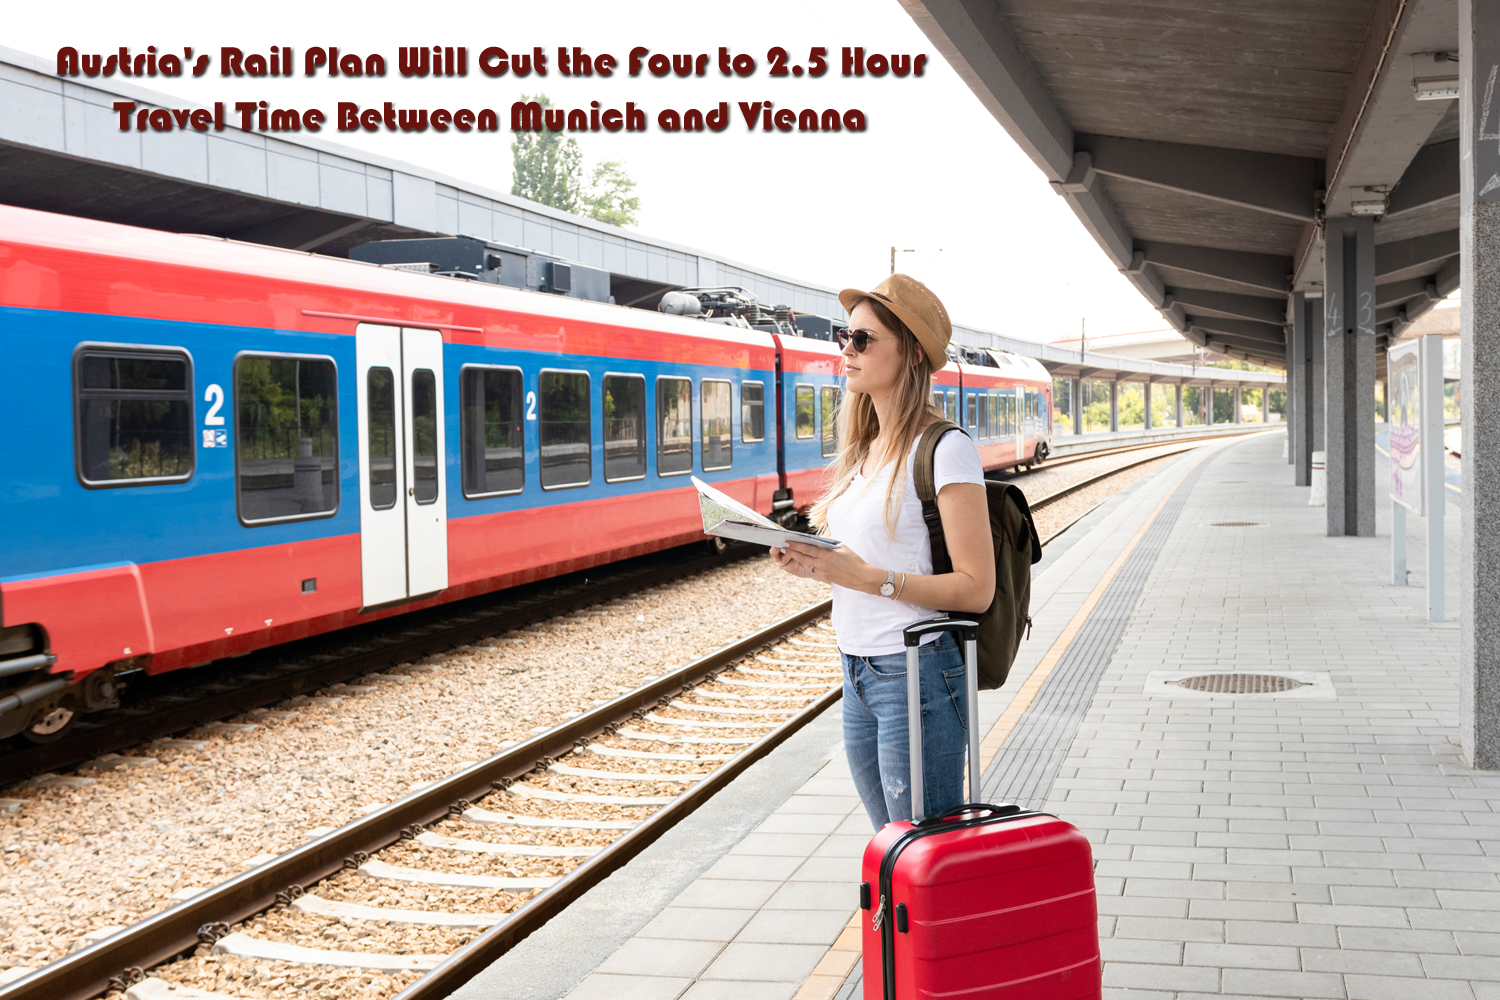 Austria's Rail Plan Will Cut the Four to 2.5 Hour Travel Time Between Munich and Vienna.